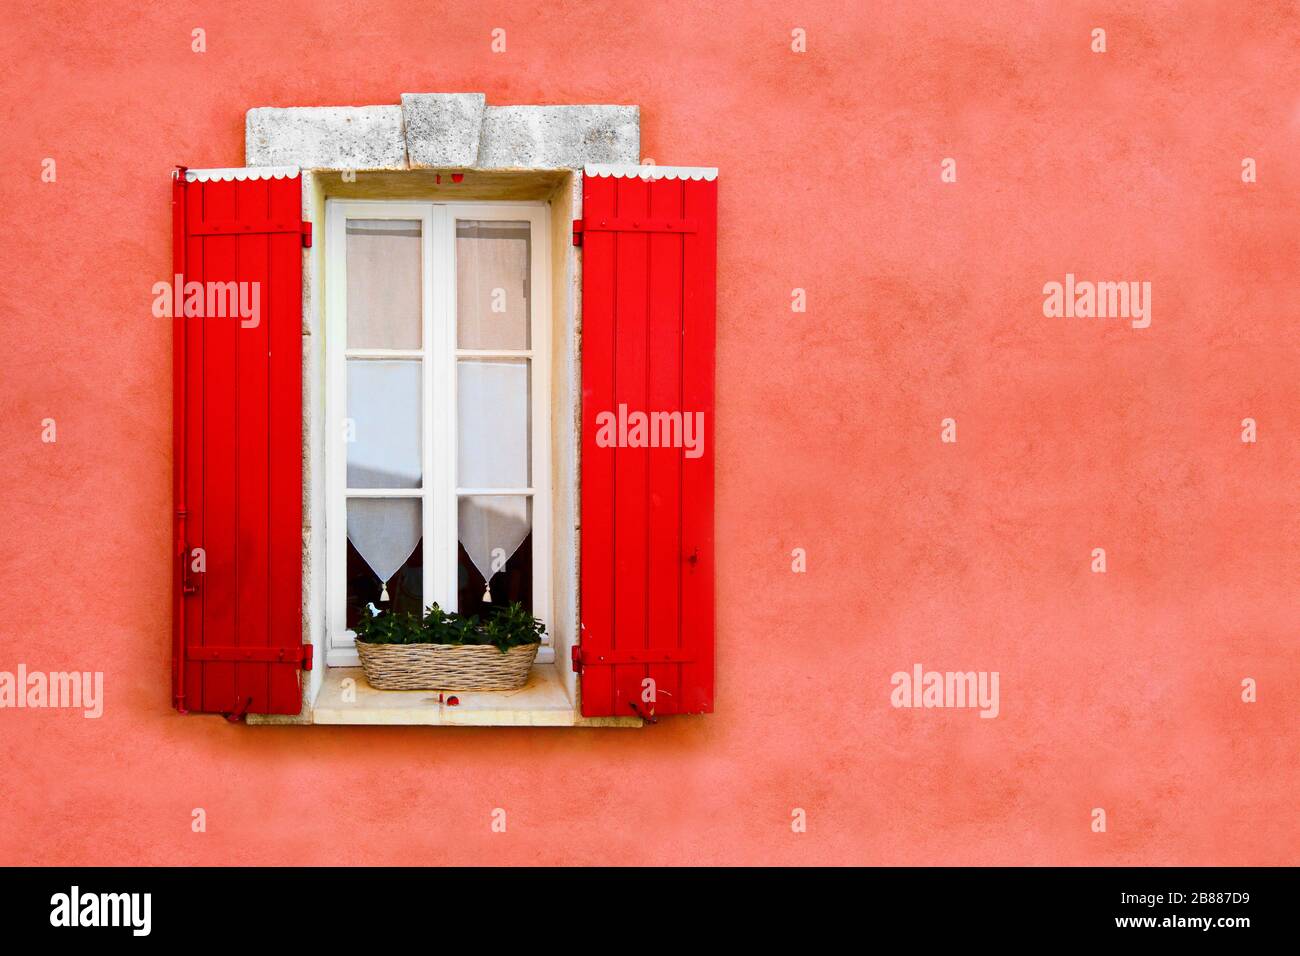 Red shuttered window against red ocher colored wall Stock Photo